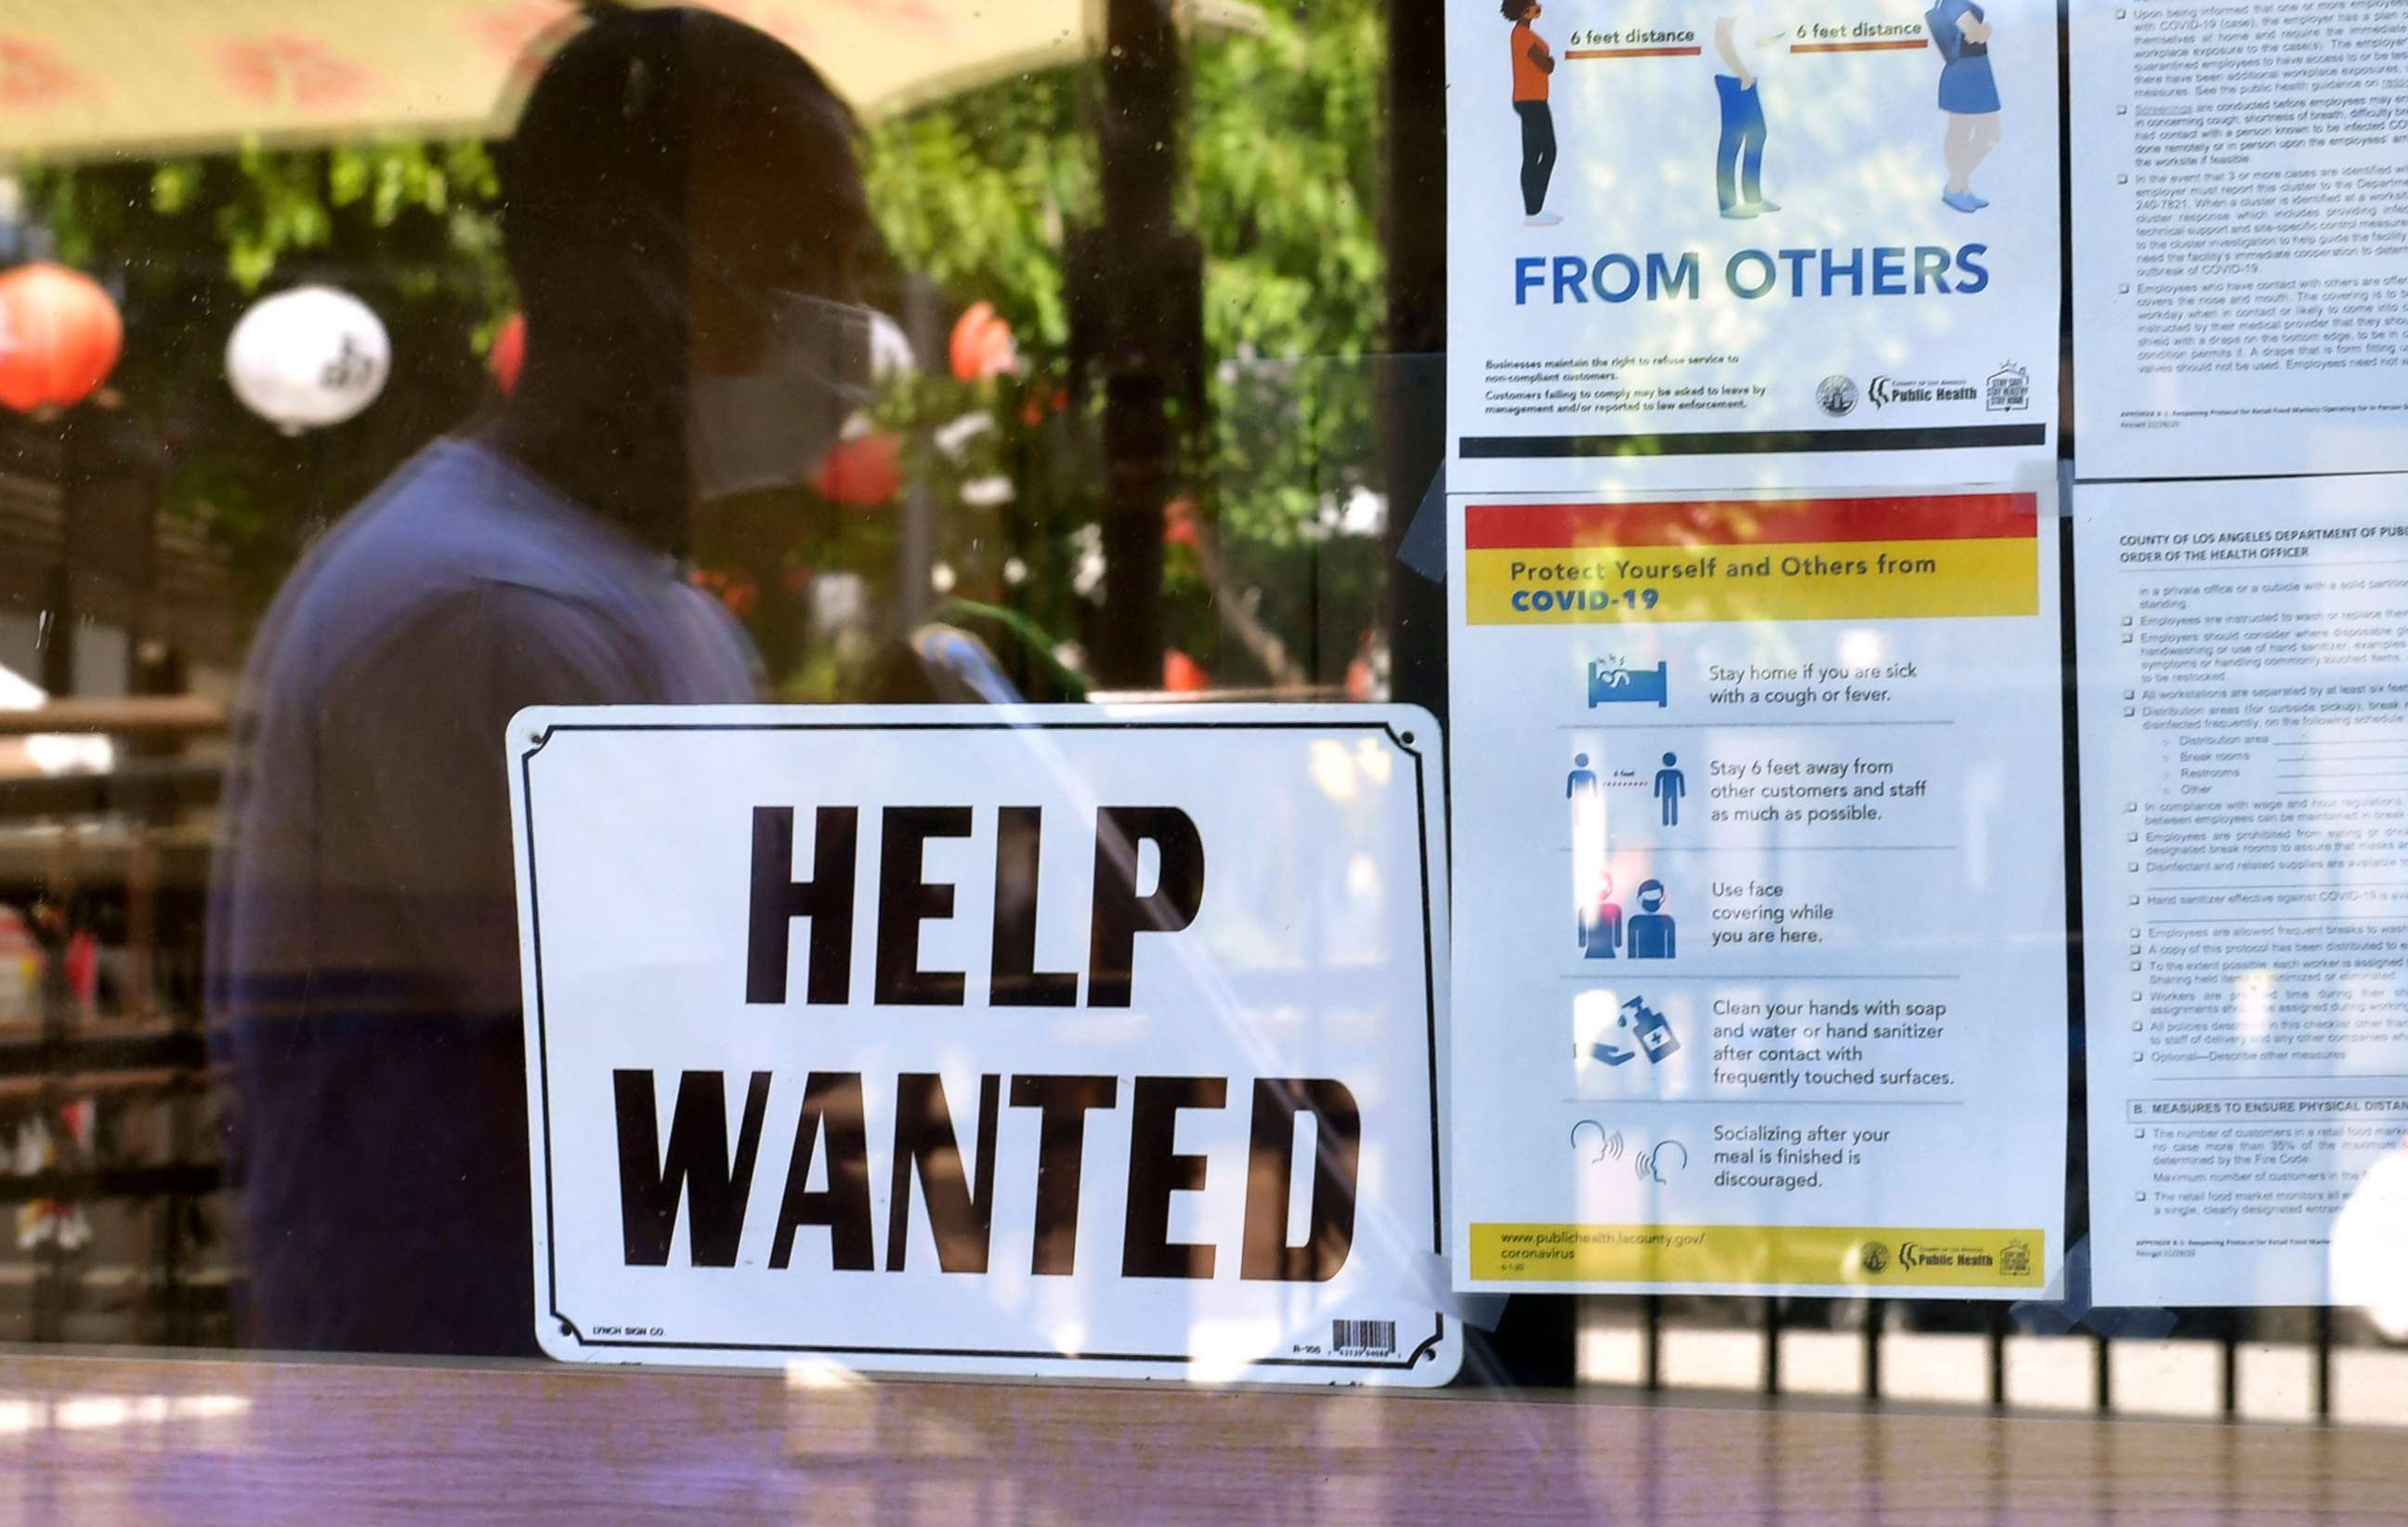 PHOTO: In this May 28, 2021, file photo, a 'Help Wanted' sign is posted beside Coronavirus safety guidelines in front of a restaurant in Los Angeles.